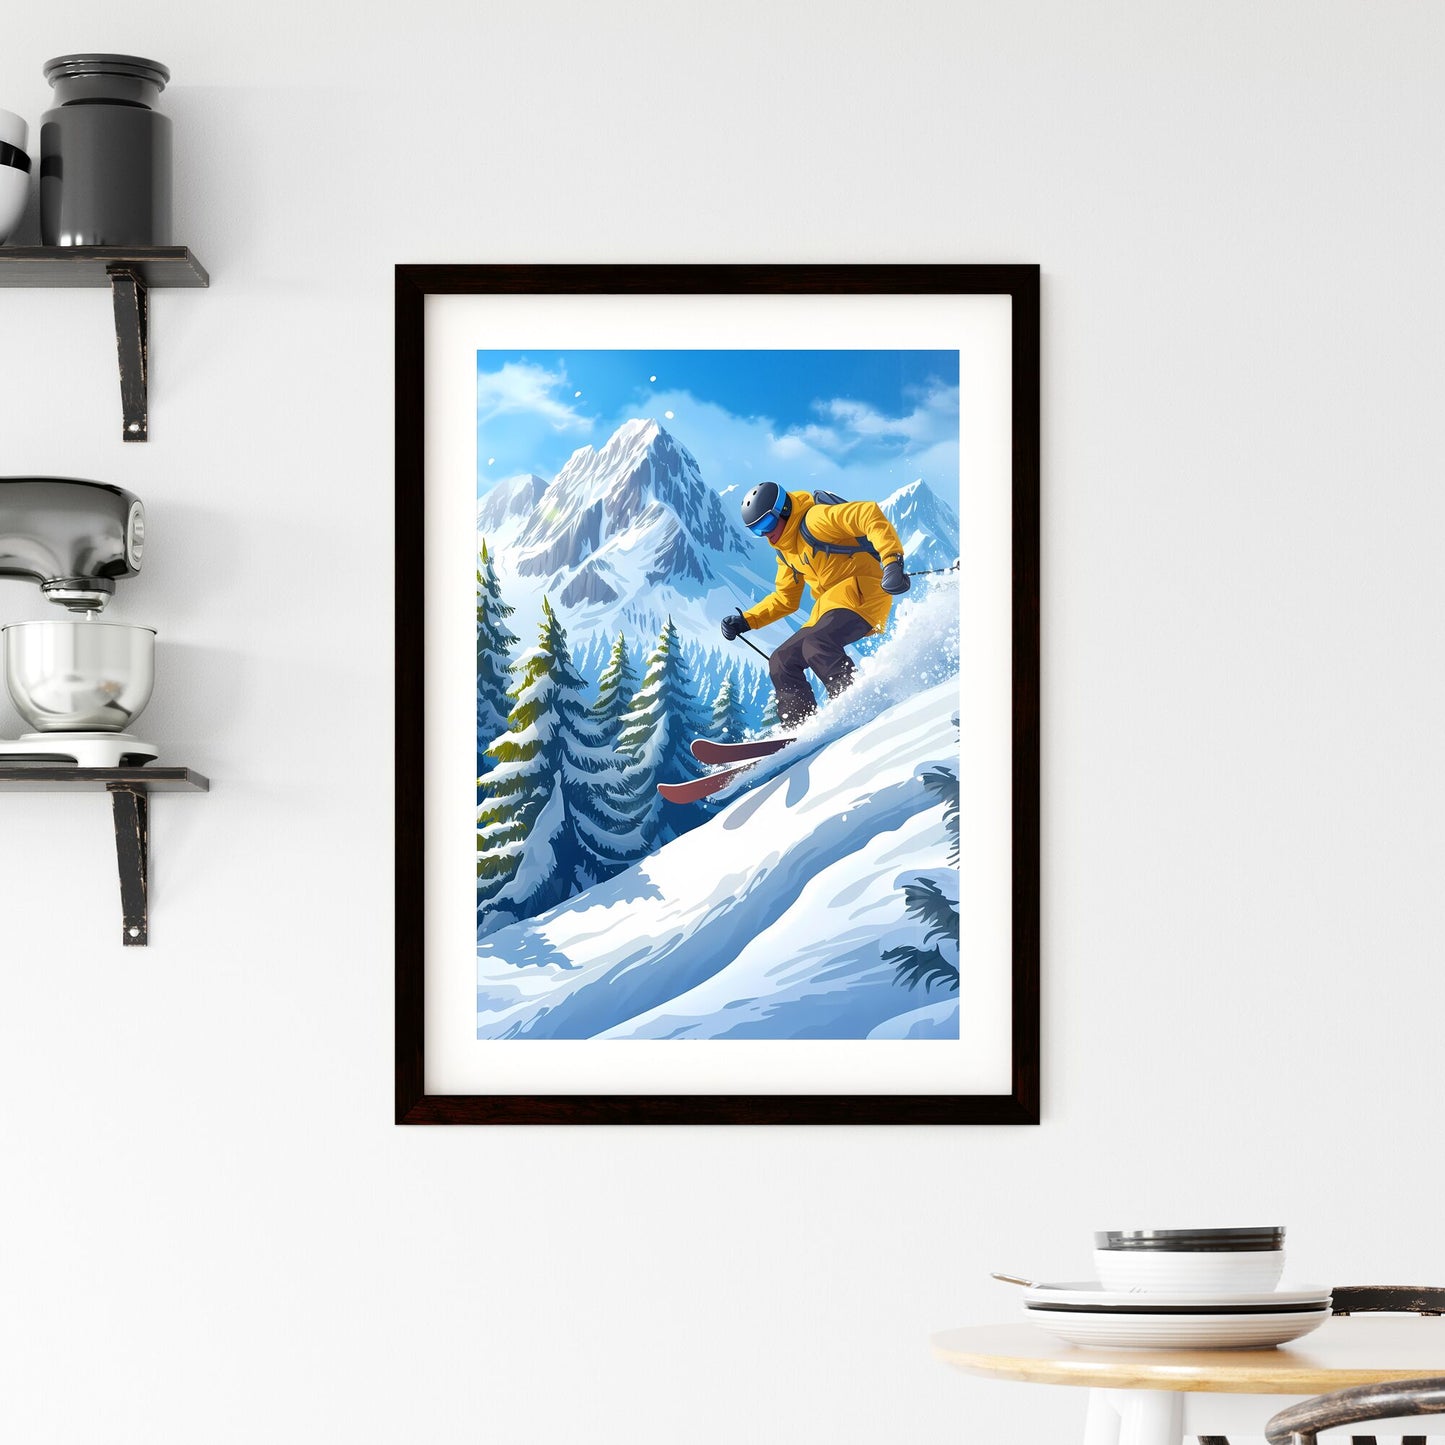 A skier wears snowboard gear and slides down a steep hill with snow - Art print of a person skiing down a snowy mountain Default Title